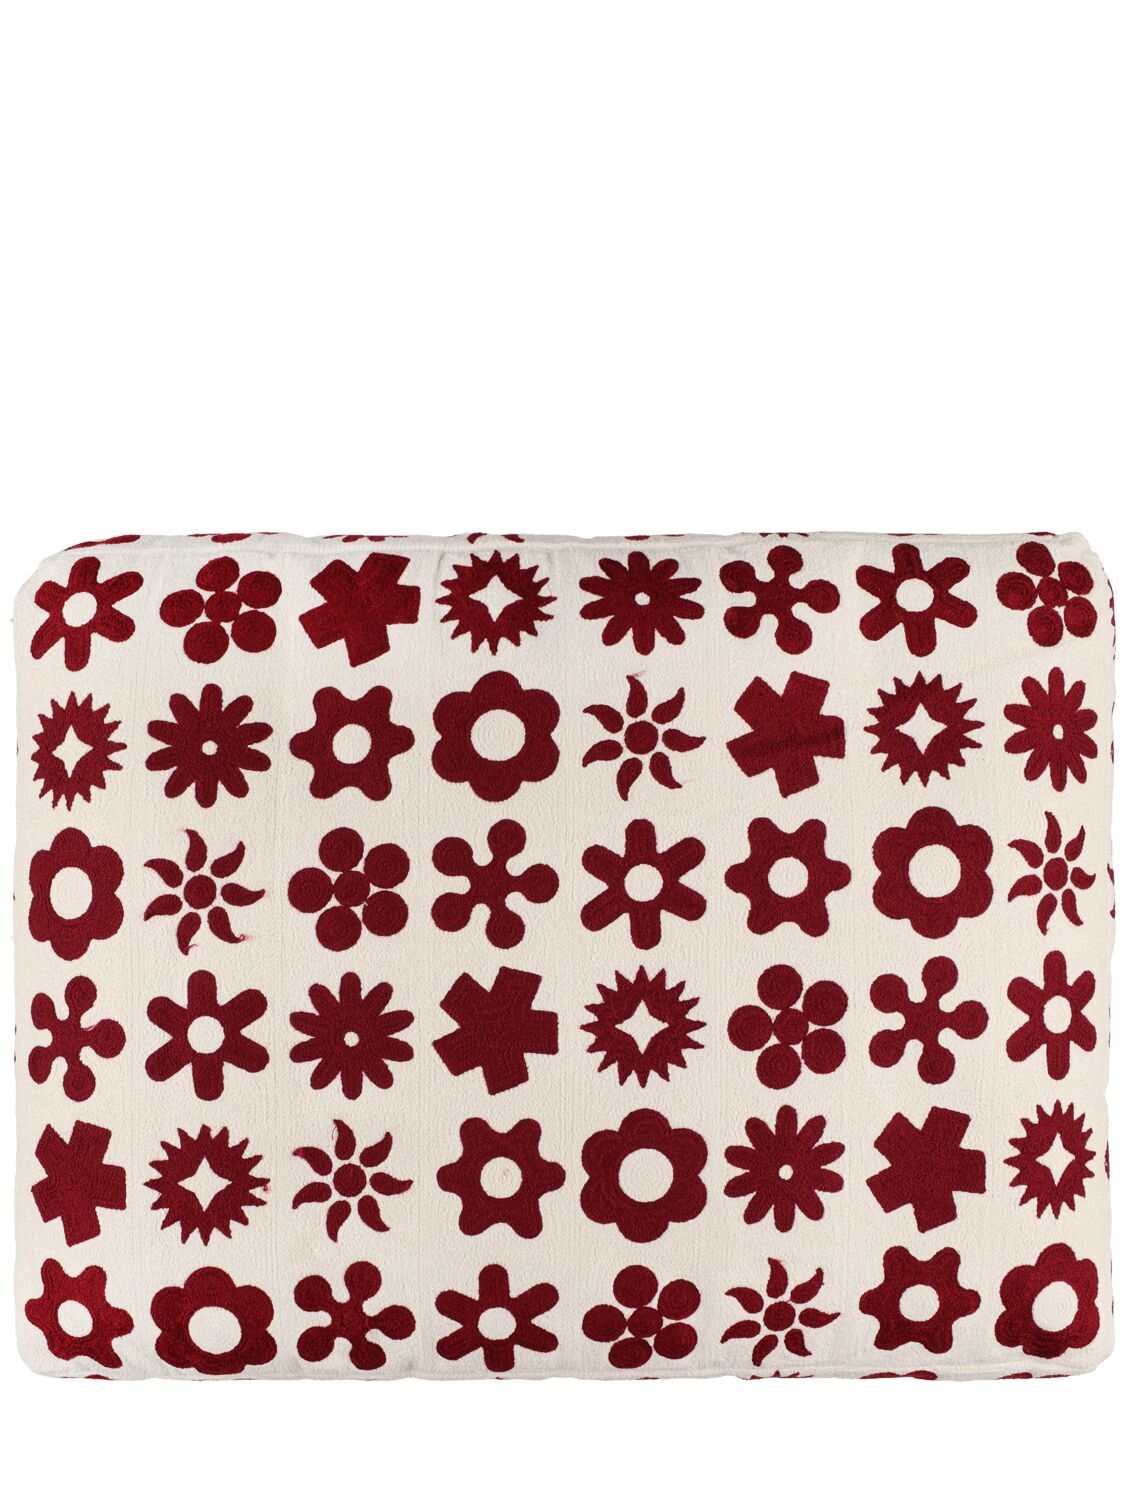 Dusen Dusen Wingdings Embroidered Dog Bed In Burgundy